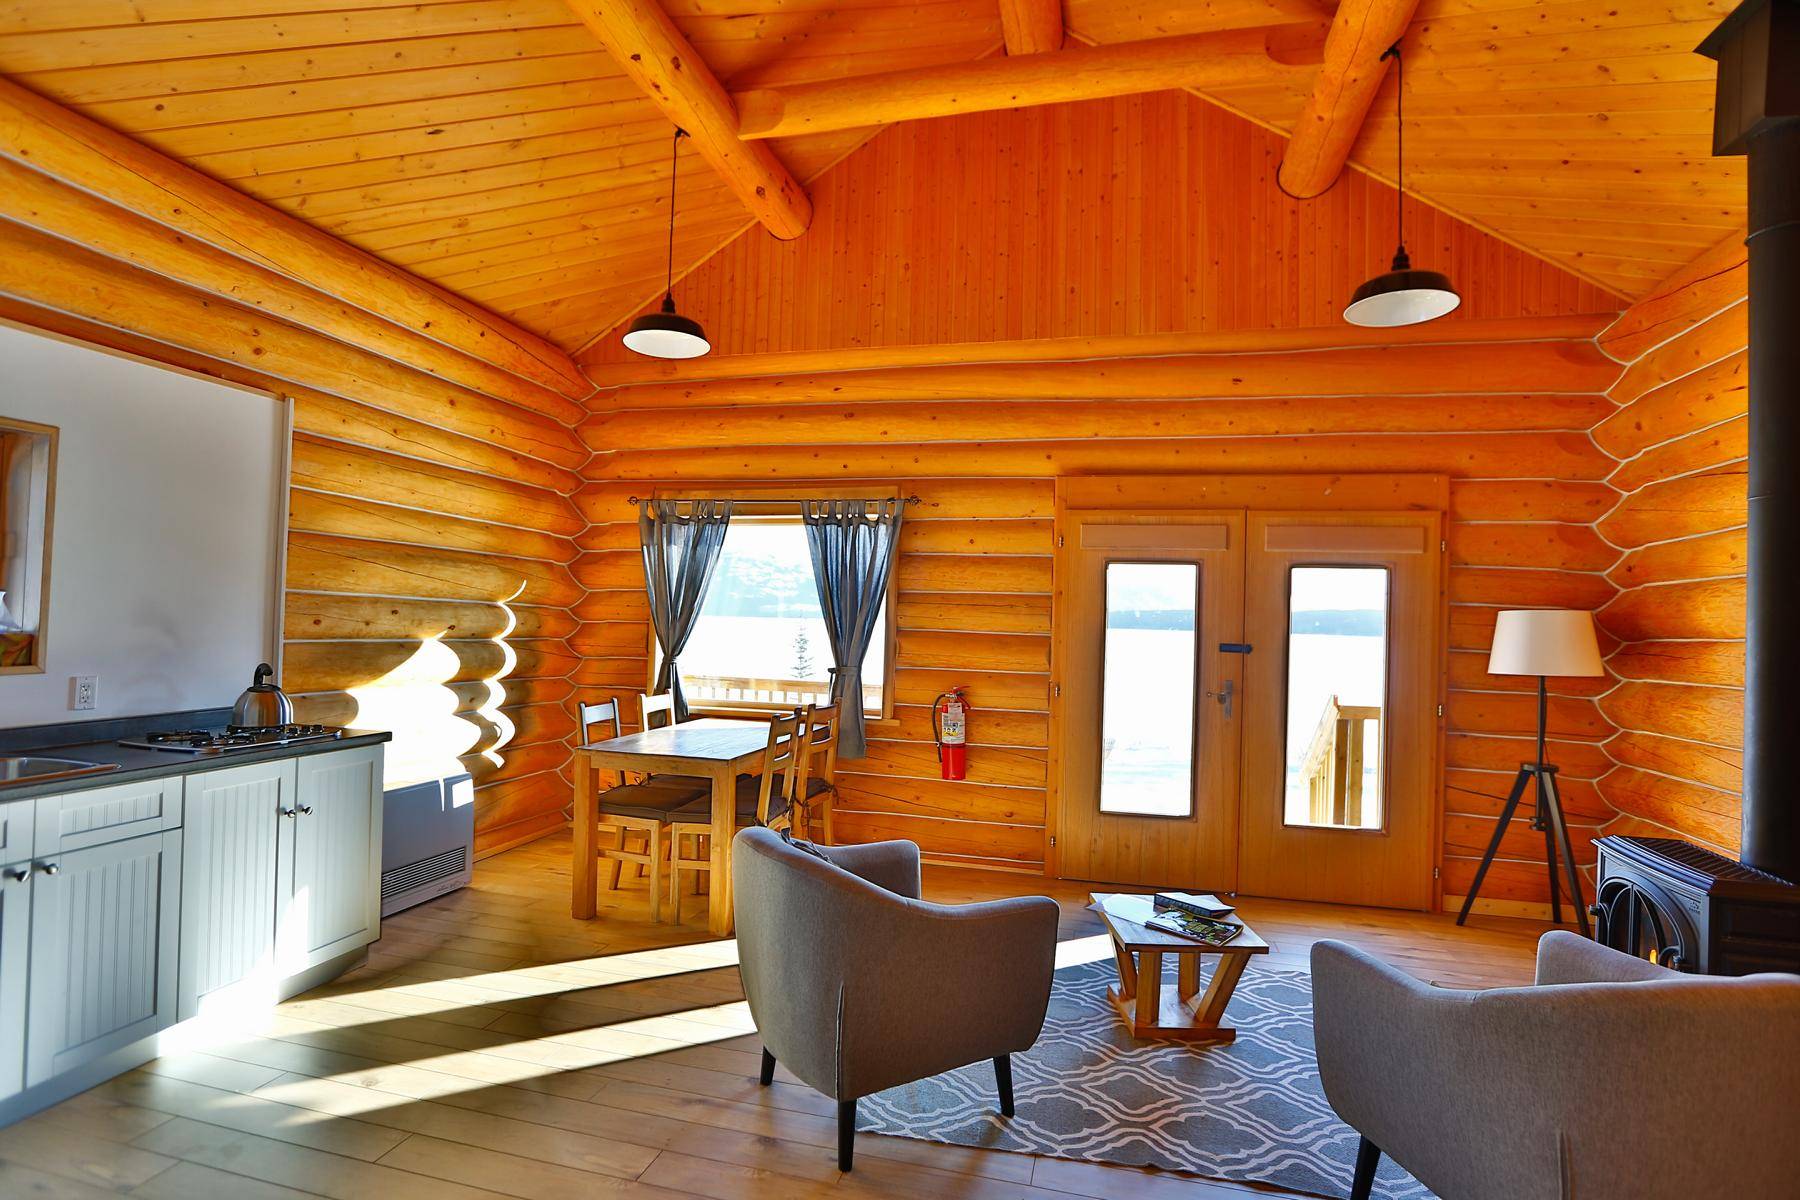 living room in family cabin, furniture and kitchen and stove